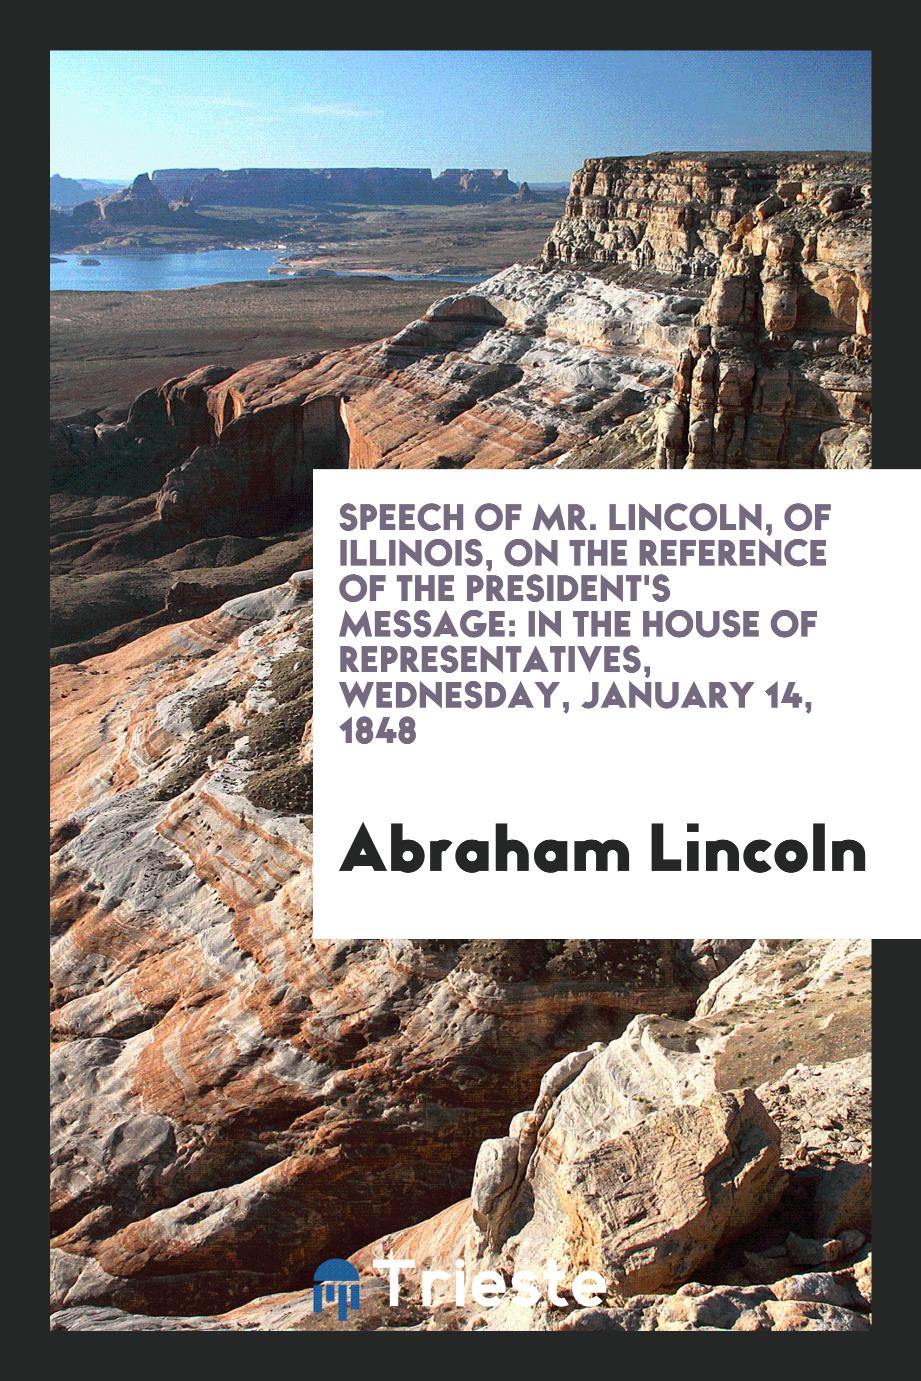 Speech of Mr. Lincoln, of Illinois, on the Reference of the President's Message: In the House of Representatives, Wednesday, January 14, 1848